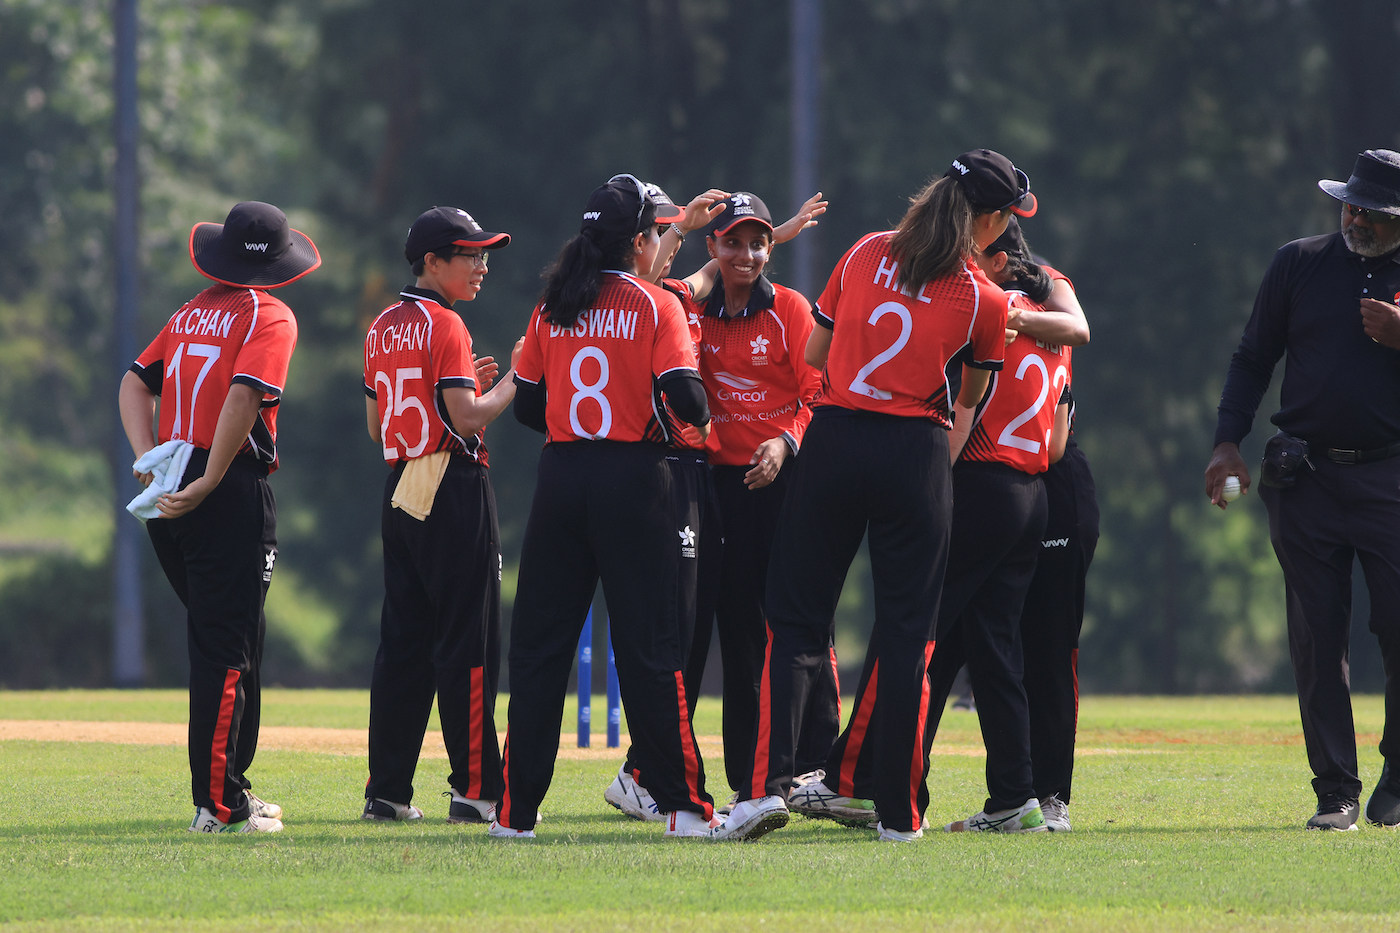 Hong Kong’s players celebrate after taking a wicket during their game against the hosts in the Malaysia T20i Quadrangular Series at Bayuemas Oval. Photo: Malaysian Cricket Association